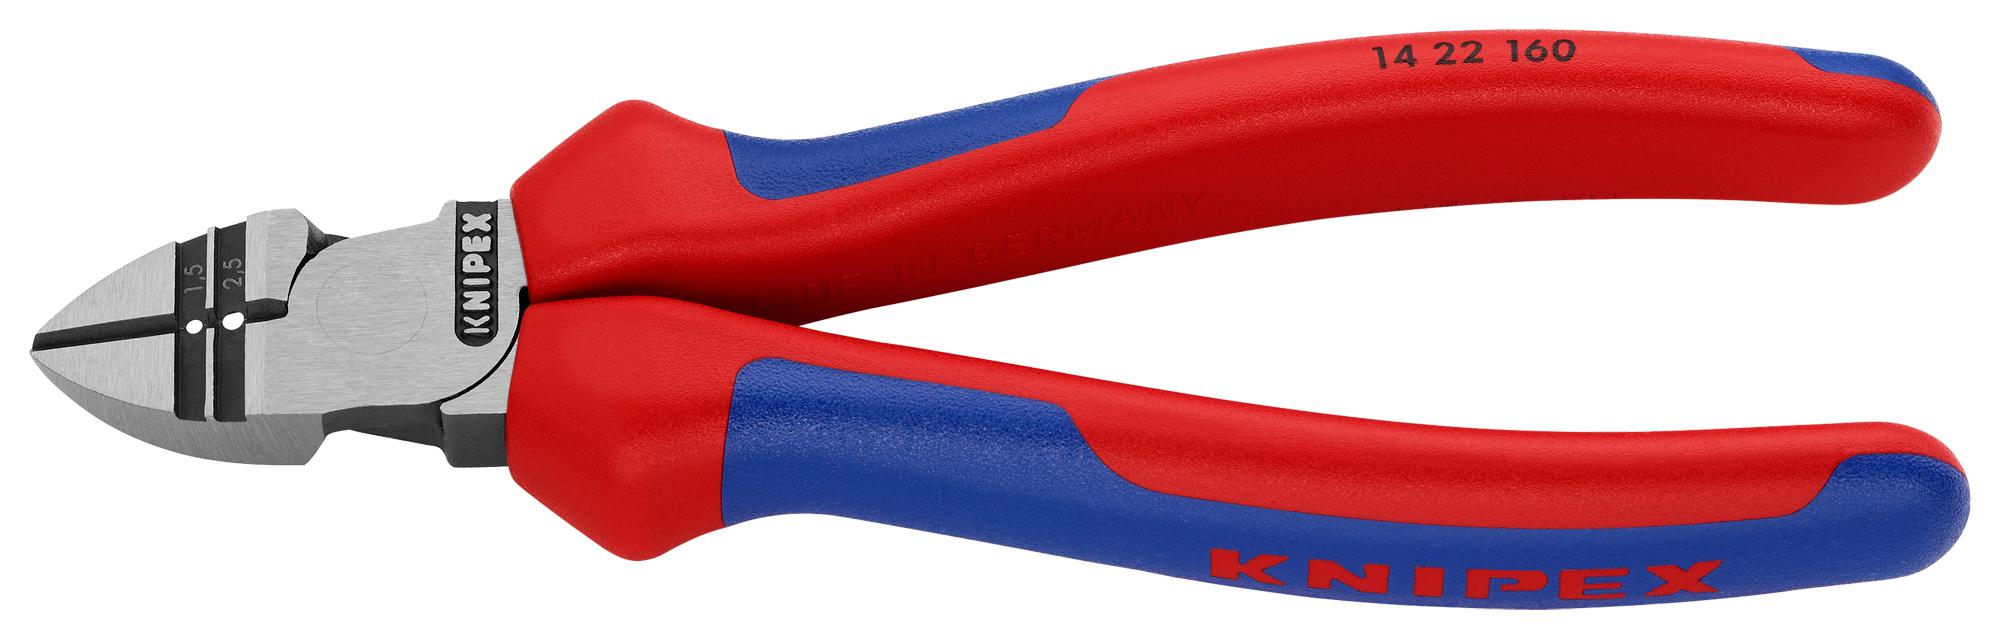 Knipex 14 22 160 Cutter, Side